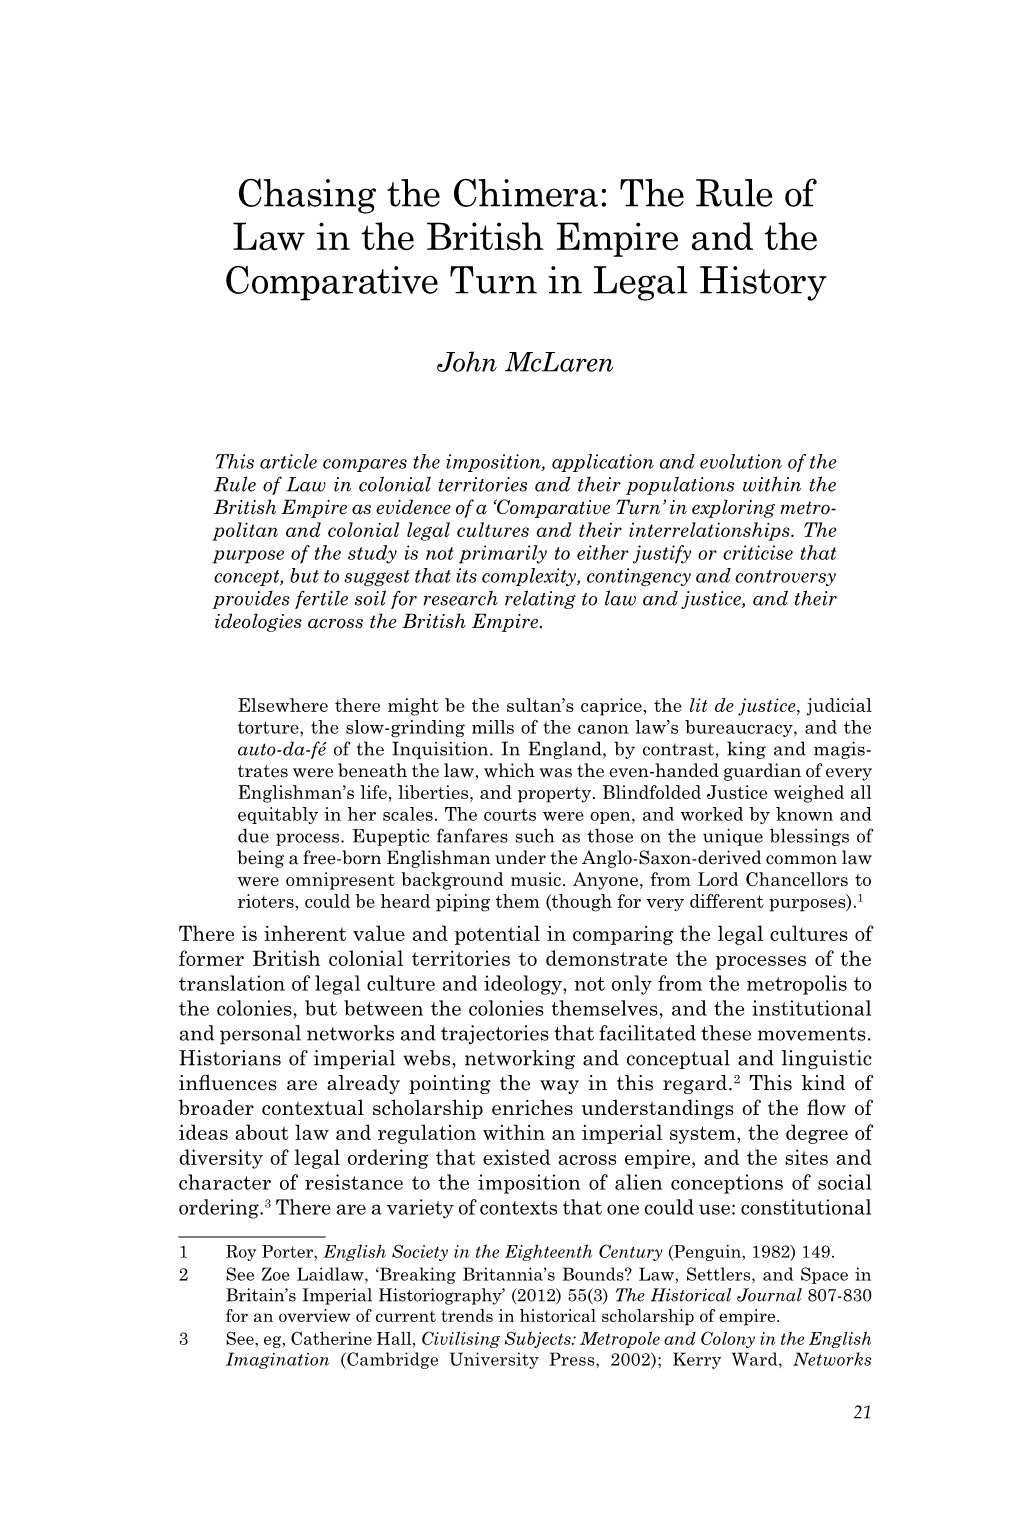 Chasing the Chimera: the Rule of Law in the British Empire and the Comparative Turn in Legal History